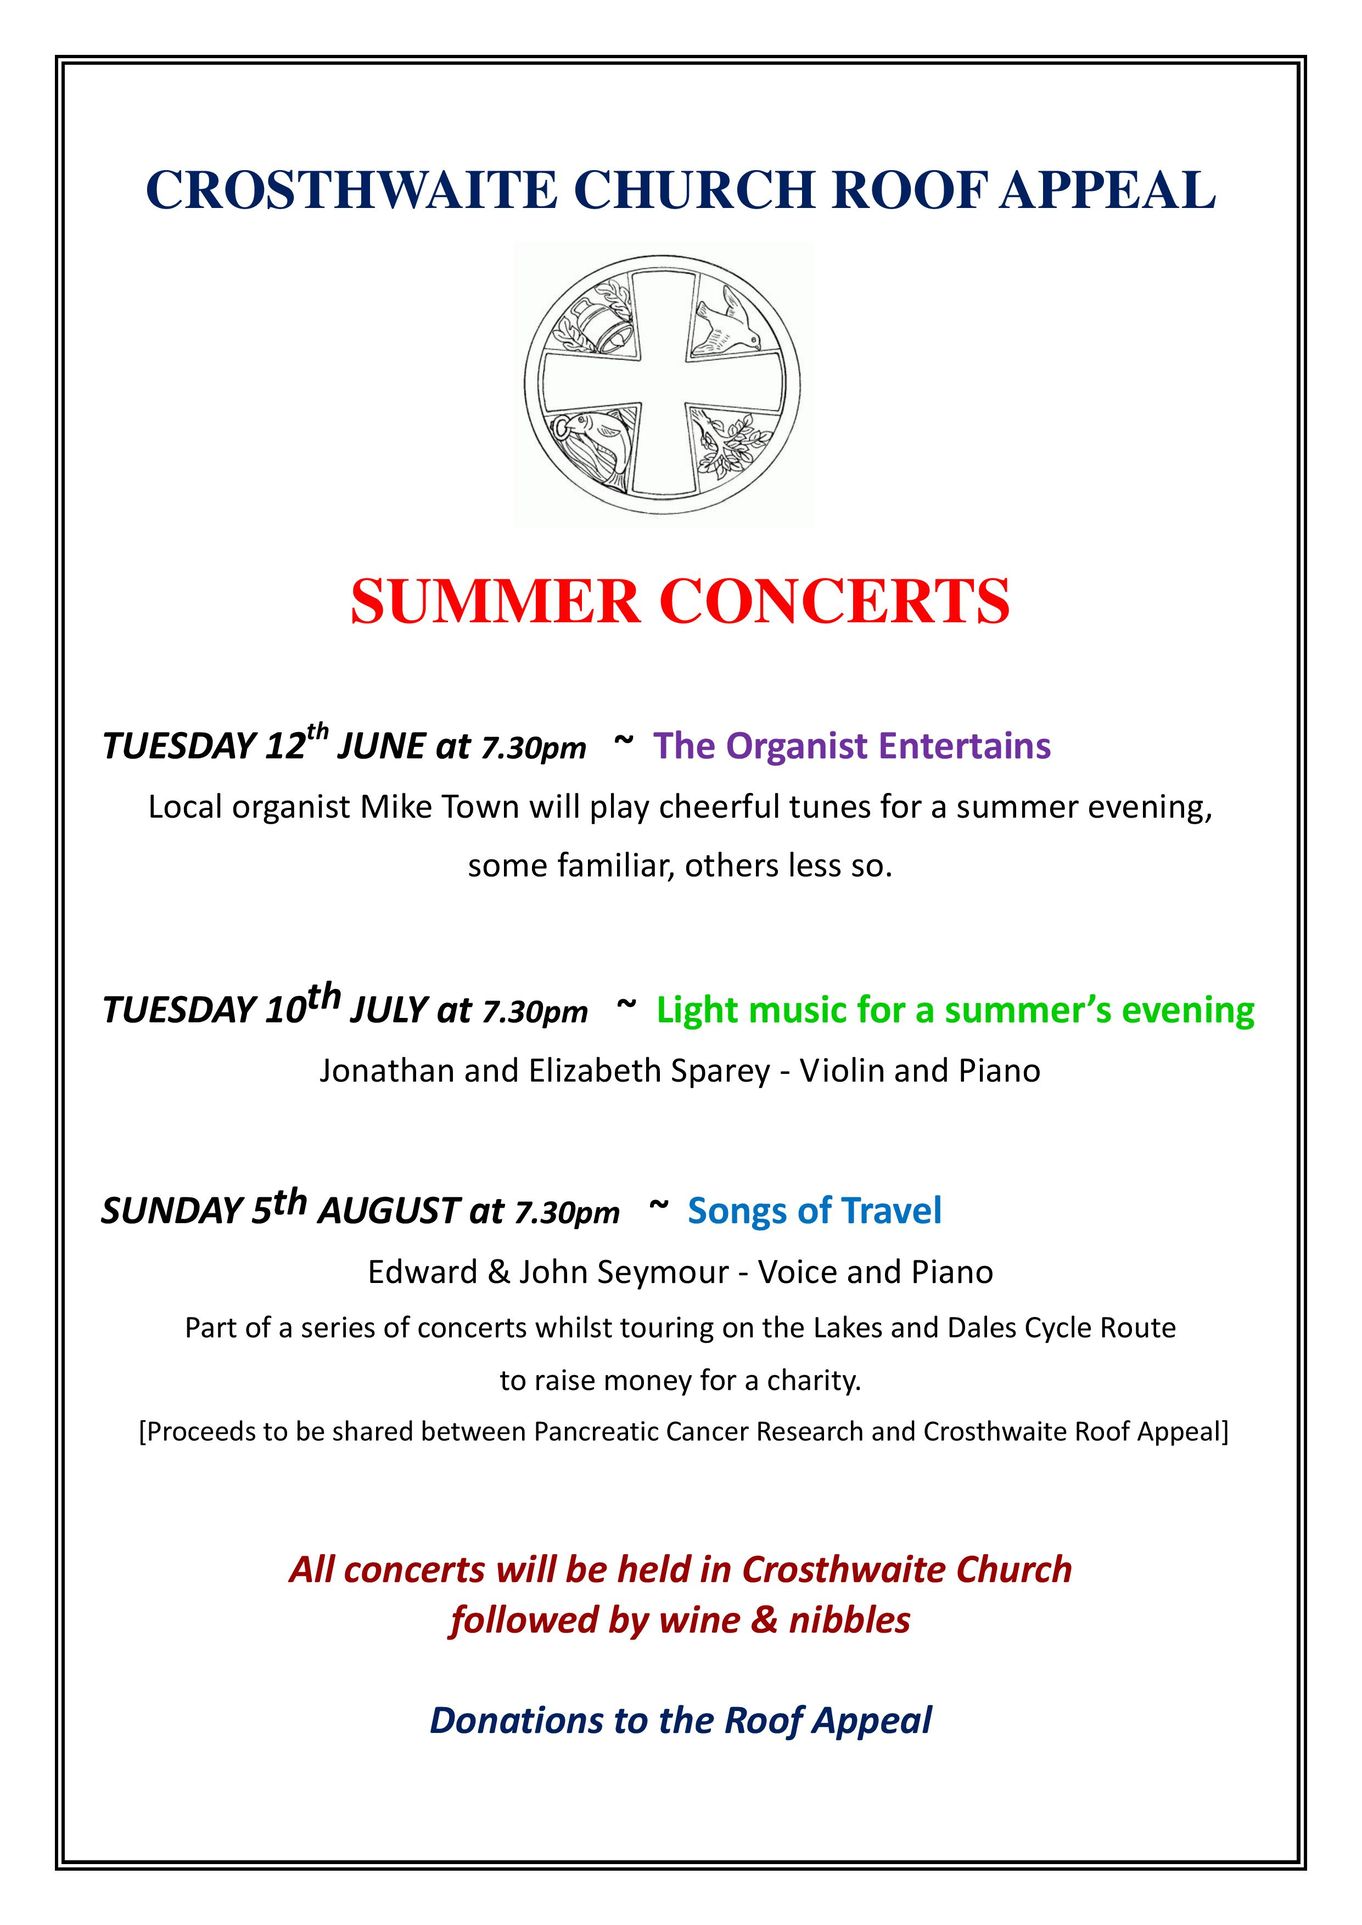 Crosthwaite Church Roof Appeal Summer Concerts